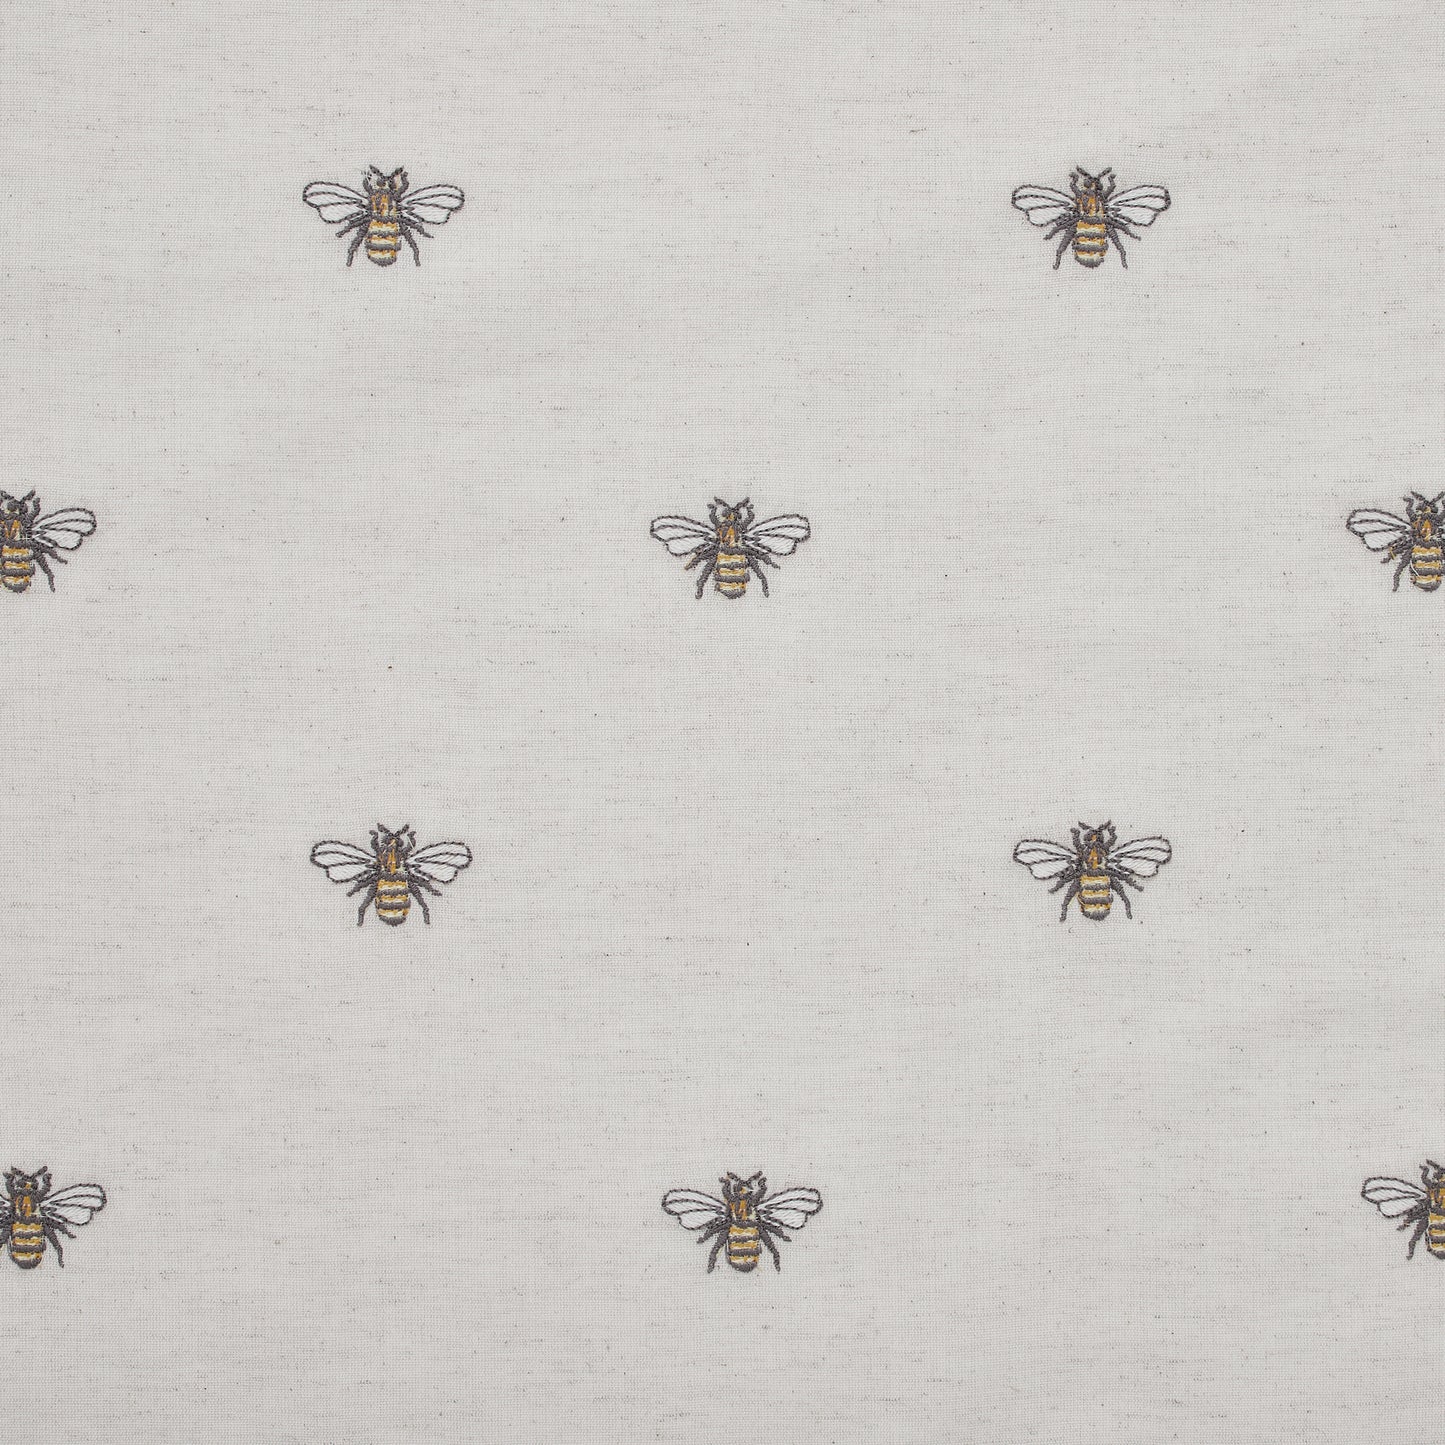 81265-Embroidered-Bee-Valance-16x90-image-7